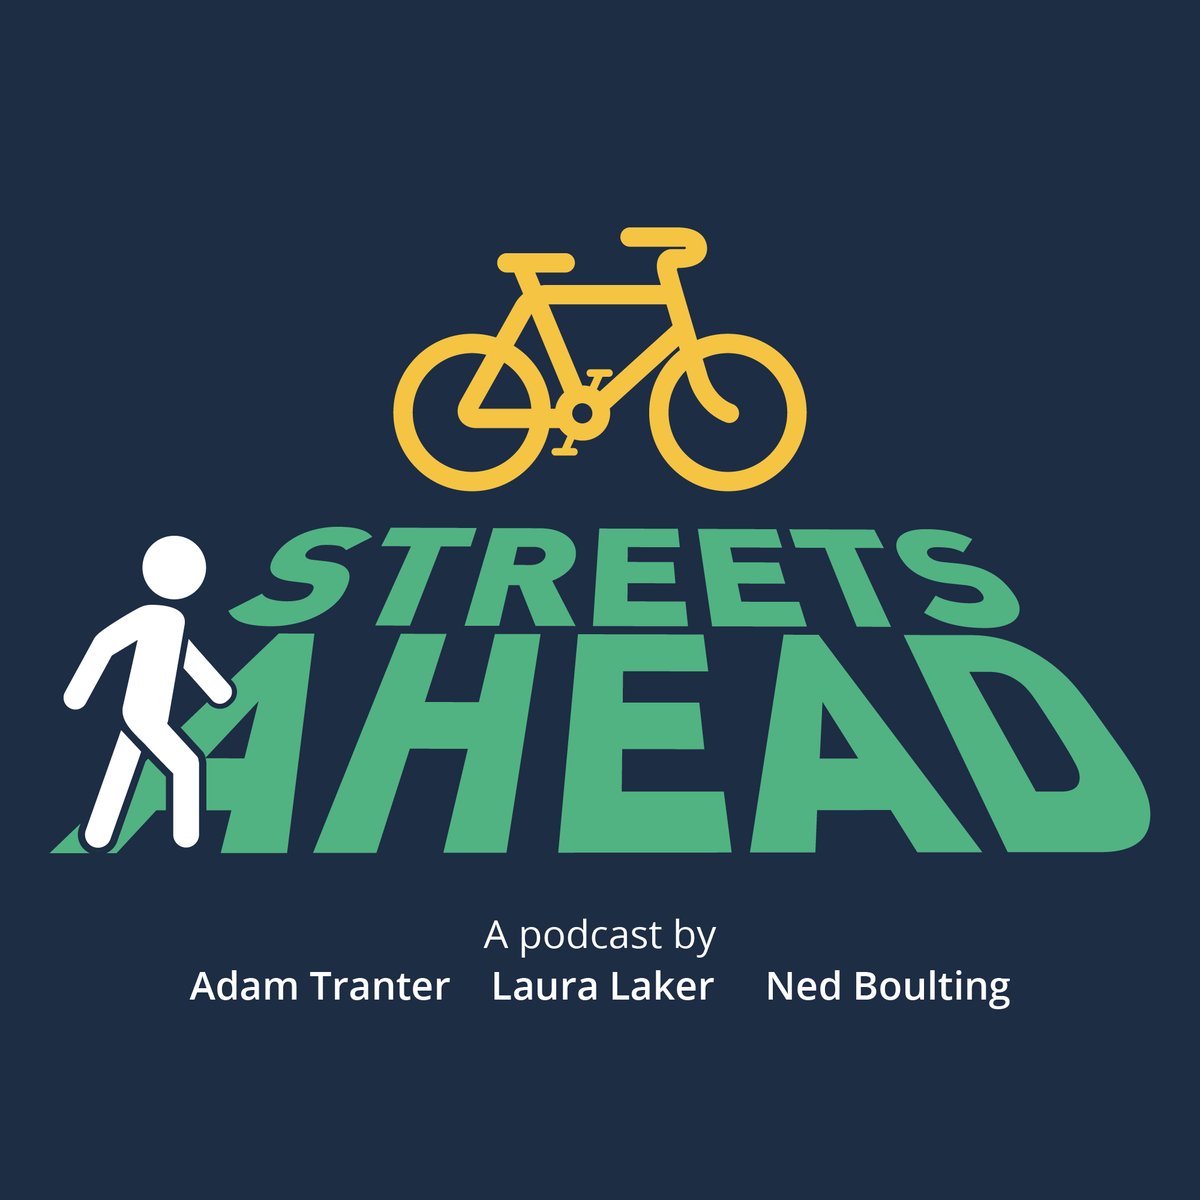 🚨NEWS! I'm co-hosting a new podcast @podstreetsahead with @laura_laker + Ned Boulting. We talk about active travel, liveable streets and urban design 🚲🚶‍♀️🏙

I'd love it if you had a listen at🎧 streetsaheadpod.com
Or search “Streets Ahead” on your Podcast App + “Subscribe”!